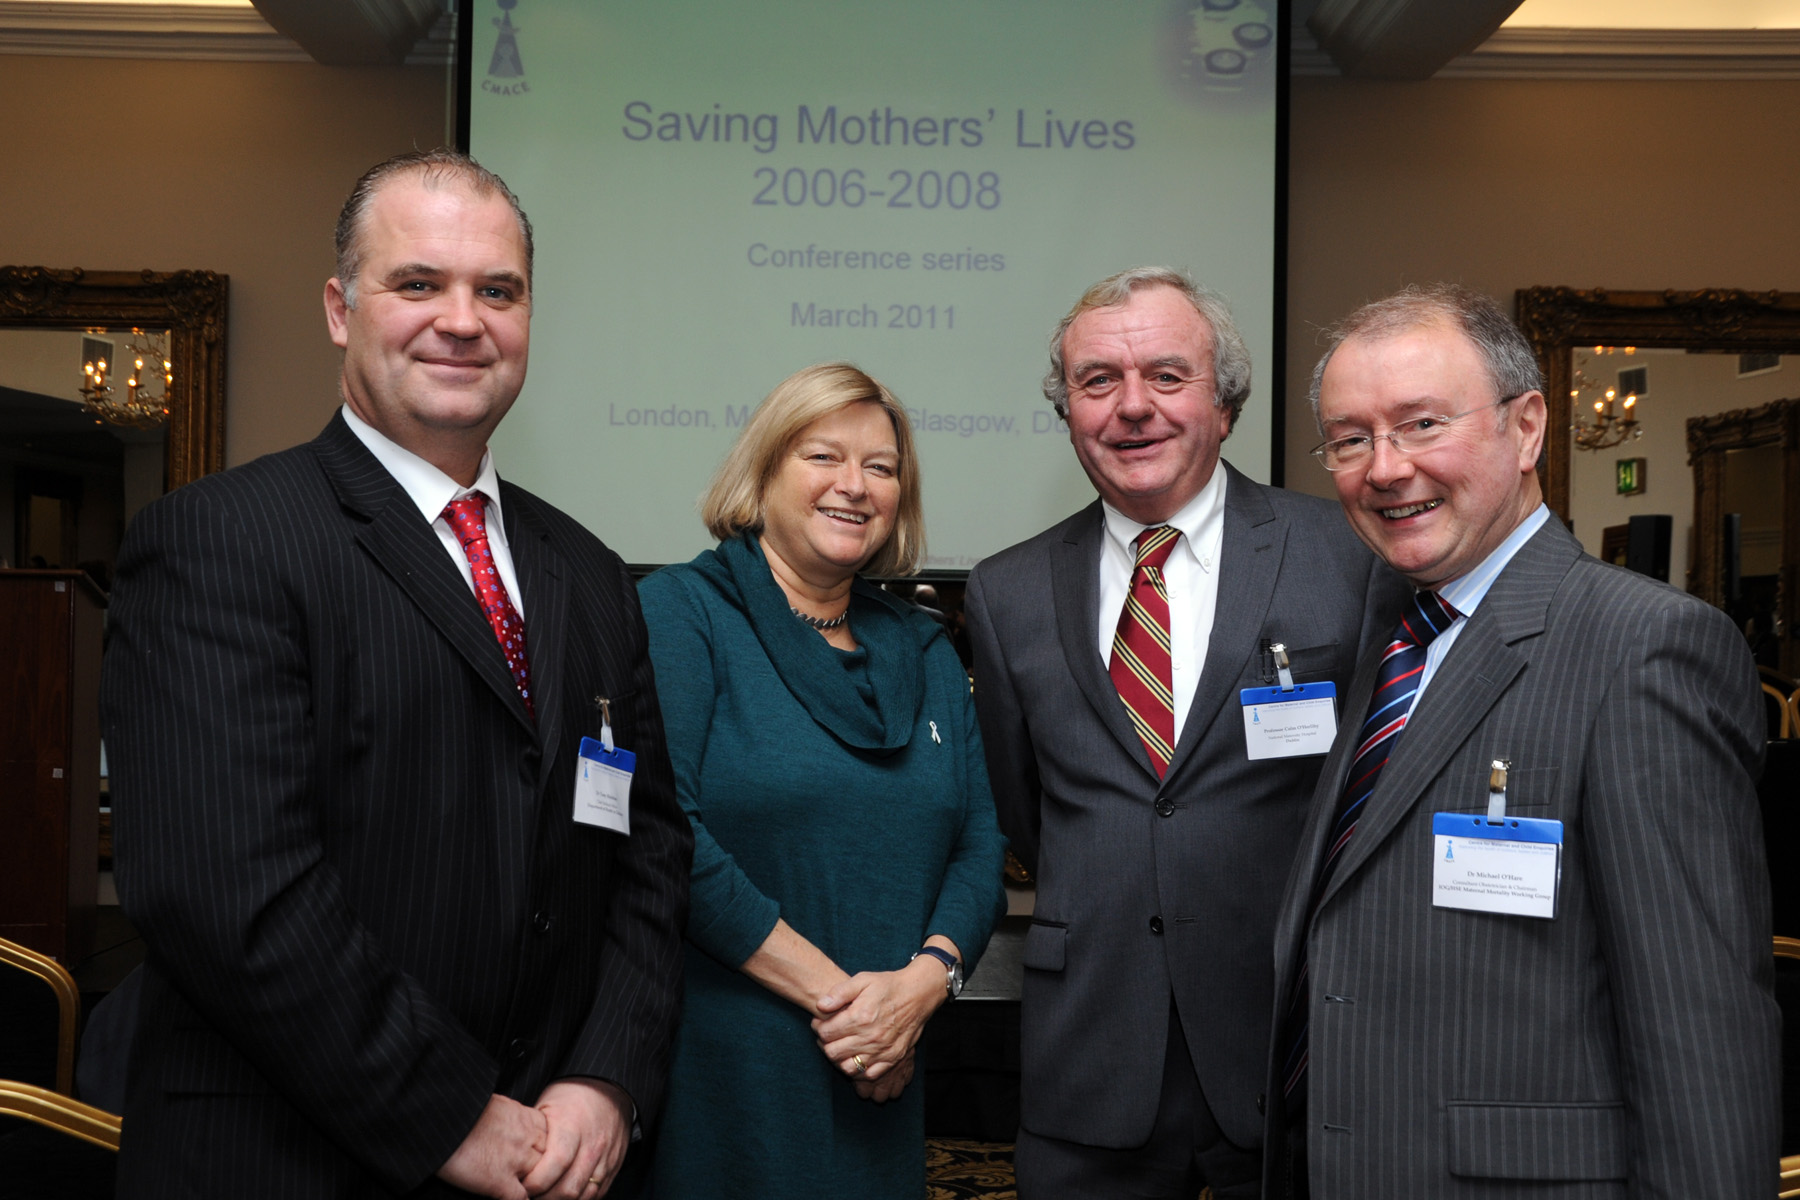 Saving Mothers’ Lives Conference: Launch of the Eighth Report of the Confidential Enquiries into Maternal Deaths in the UK, Dublin, March 2011.